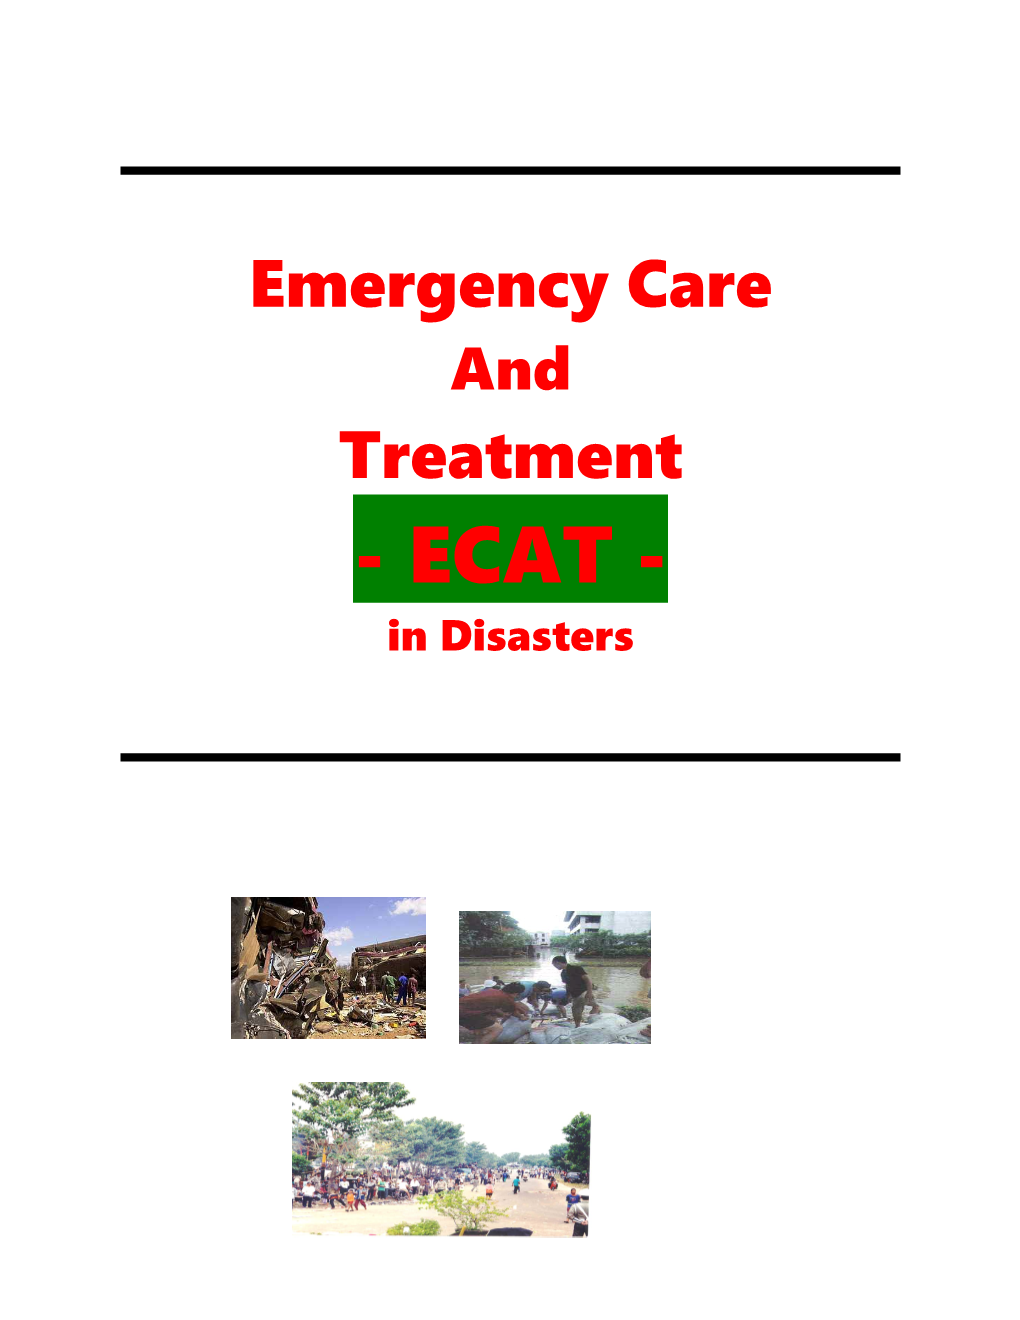 Emergency Care and Treatment (ECAT)